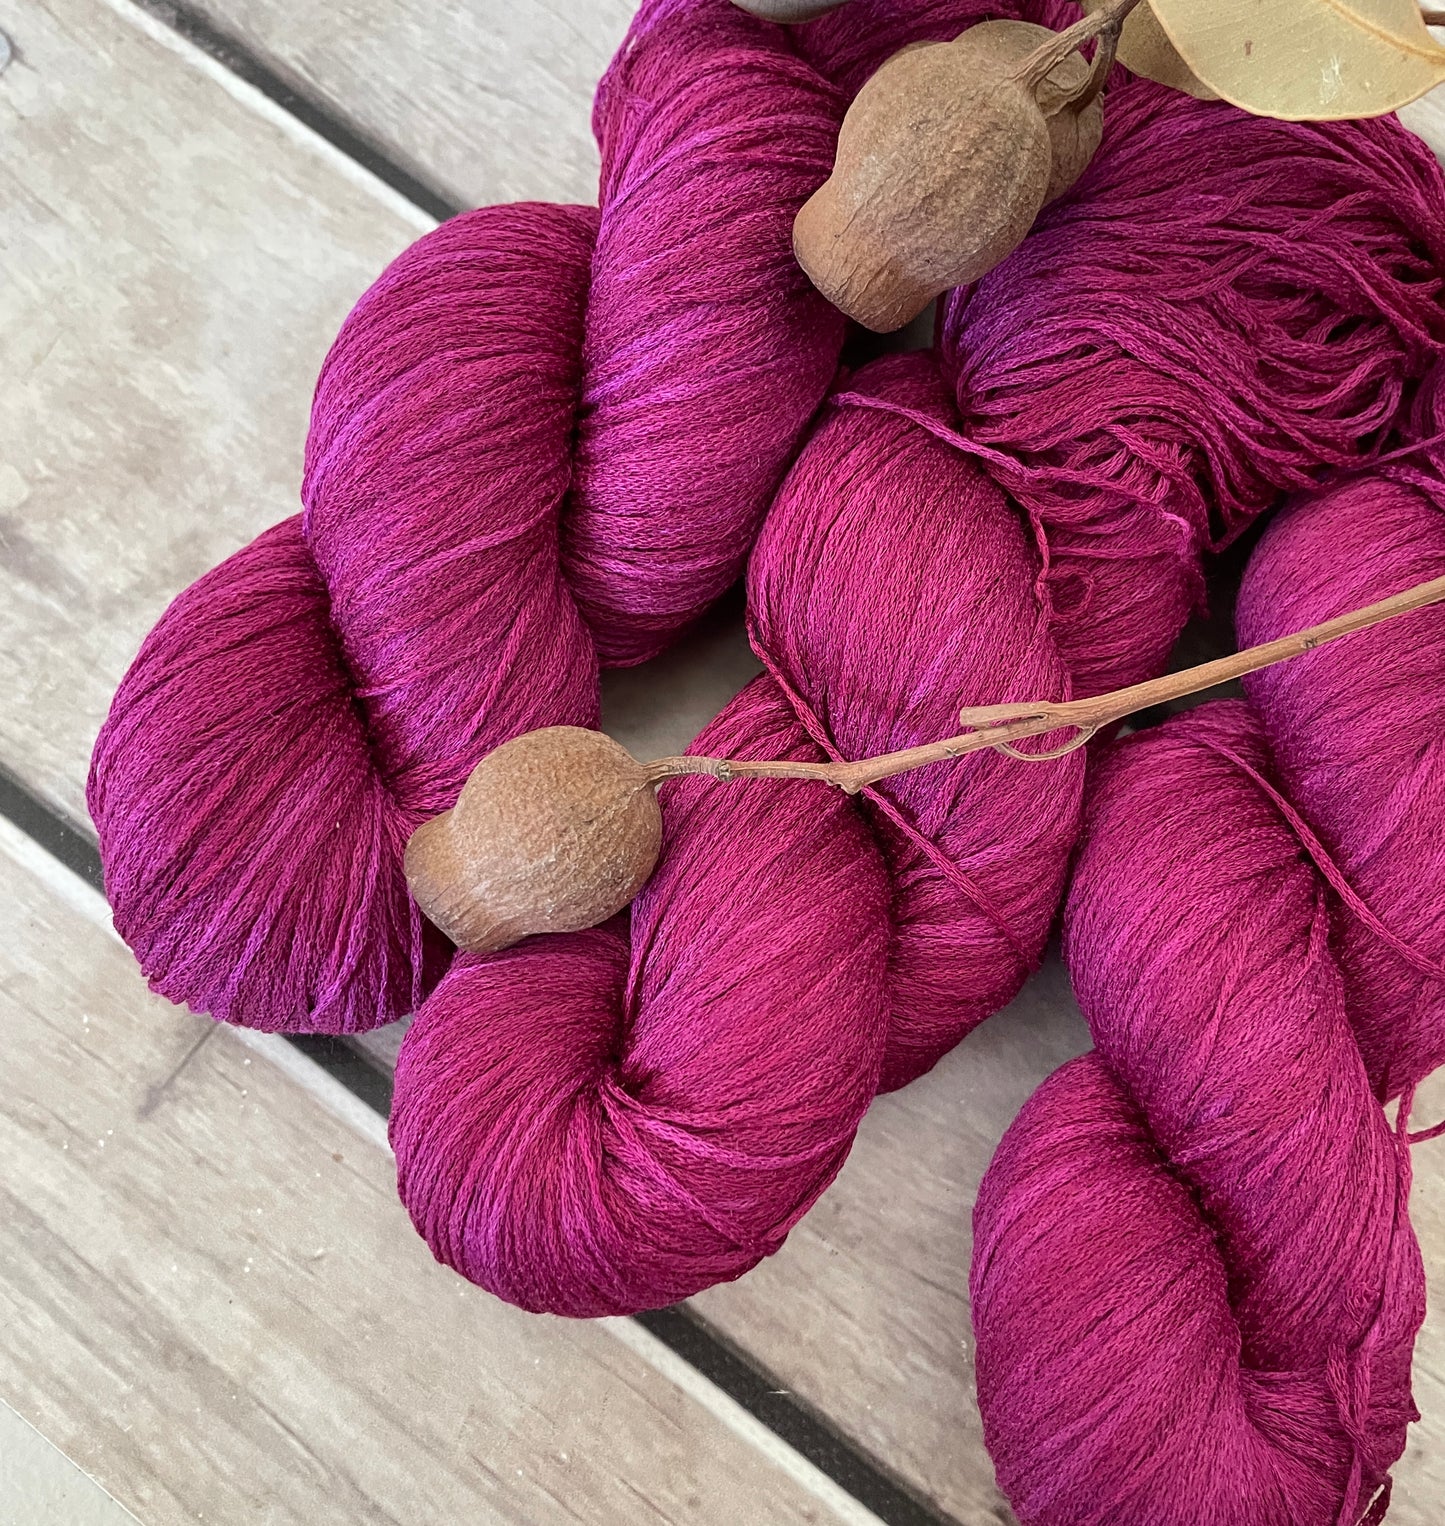 Wild Orchid on Yecha - Tussah silk chainette - 4 ply